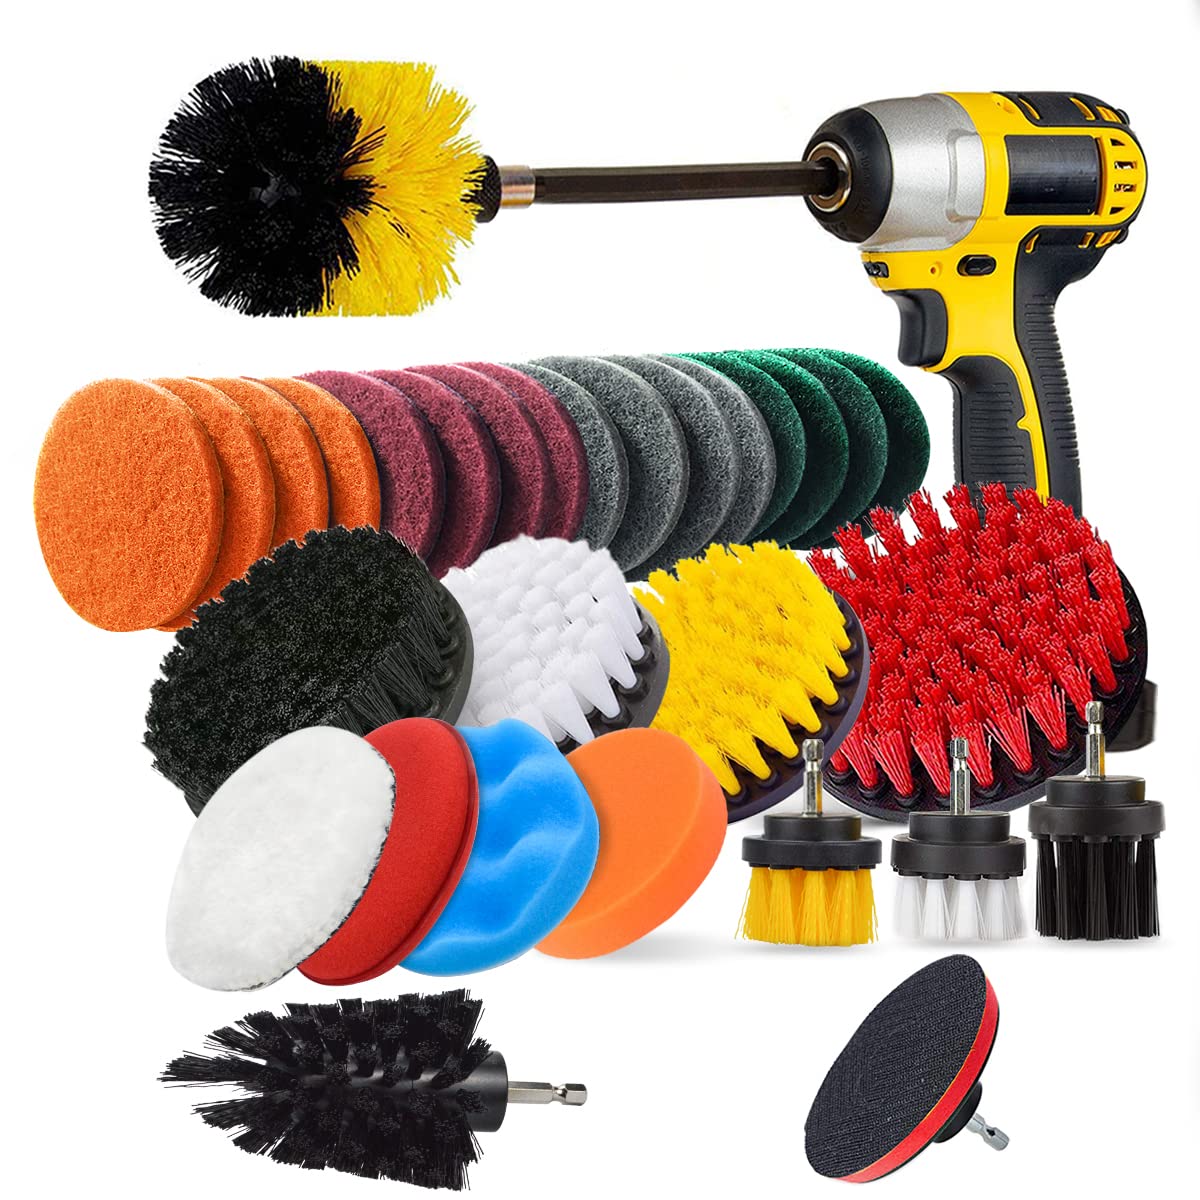 JUSONEY 31 Piece Drill Brush Attachment- Drifferent Size and Hardness- Premium Scrub Pads & Sponge- With Extend Long Attachment- Power Scrubber Brush Cleaning for Grout, Tiles, Sinks, Bathtub, Kitchen